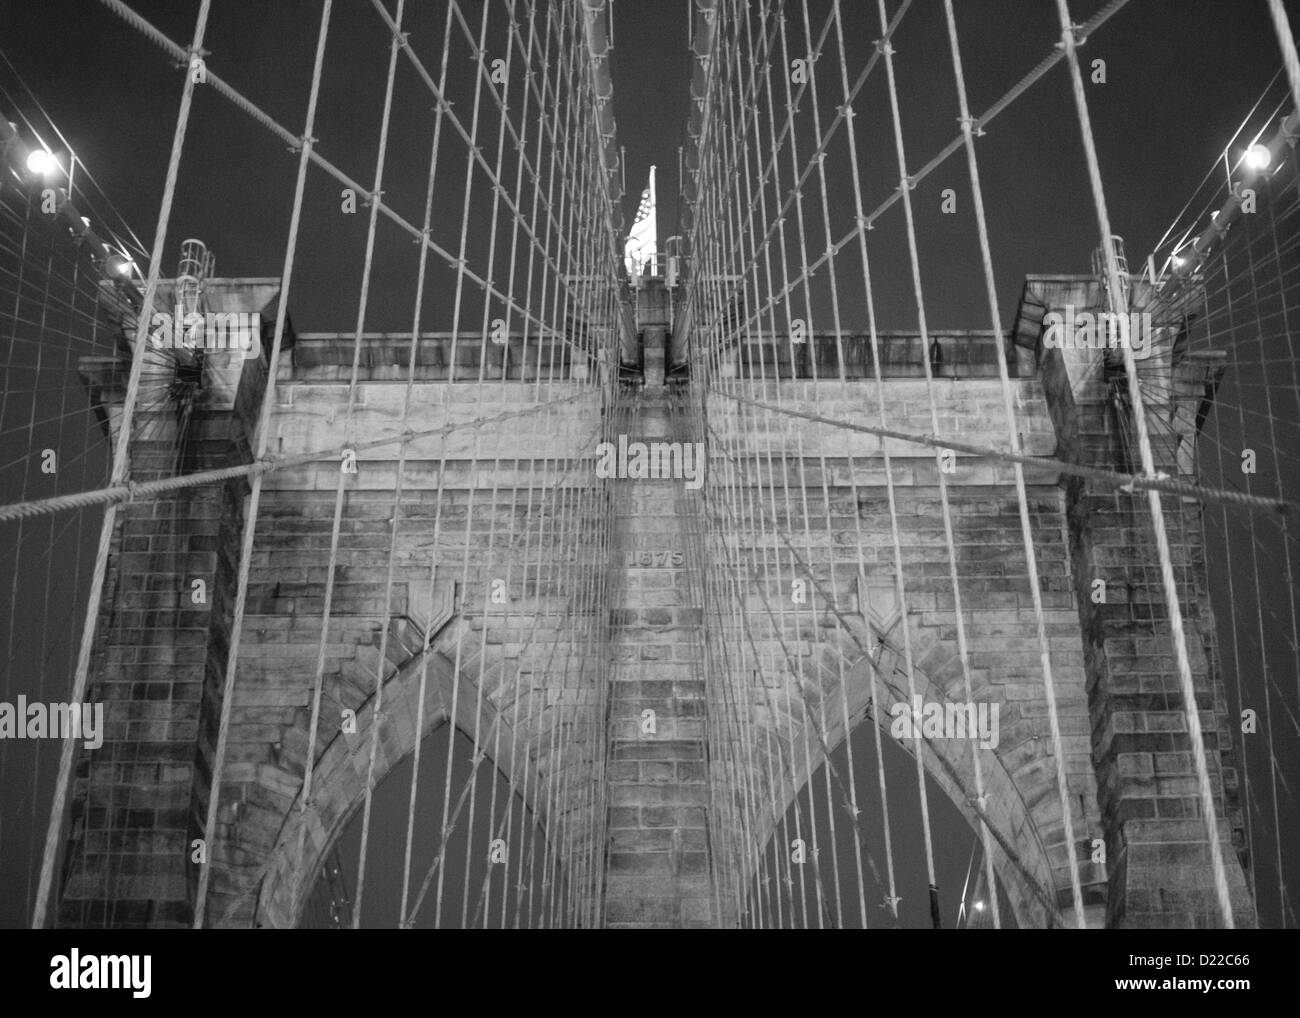 Brooklyn Bridge arch at night in black and white Stock Photo